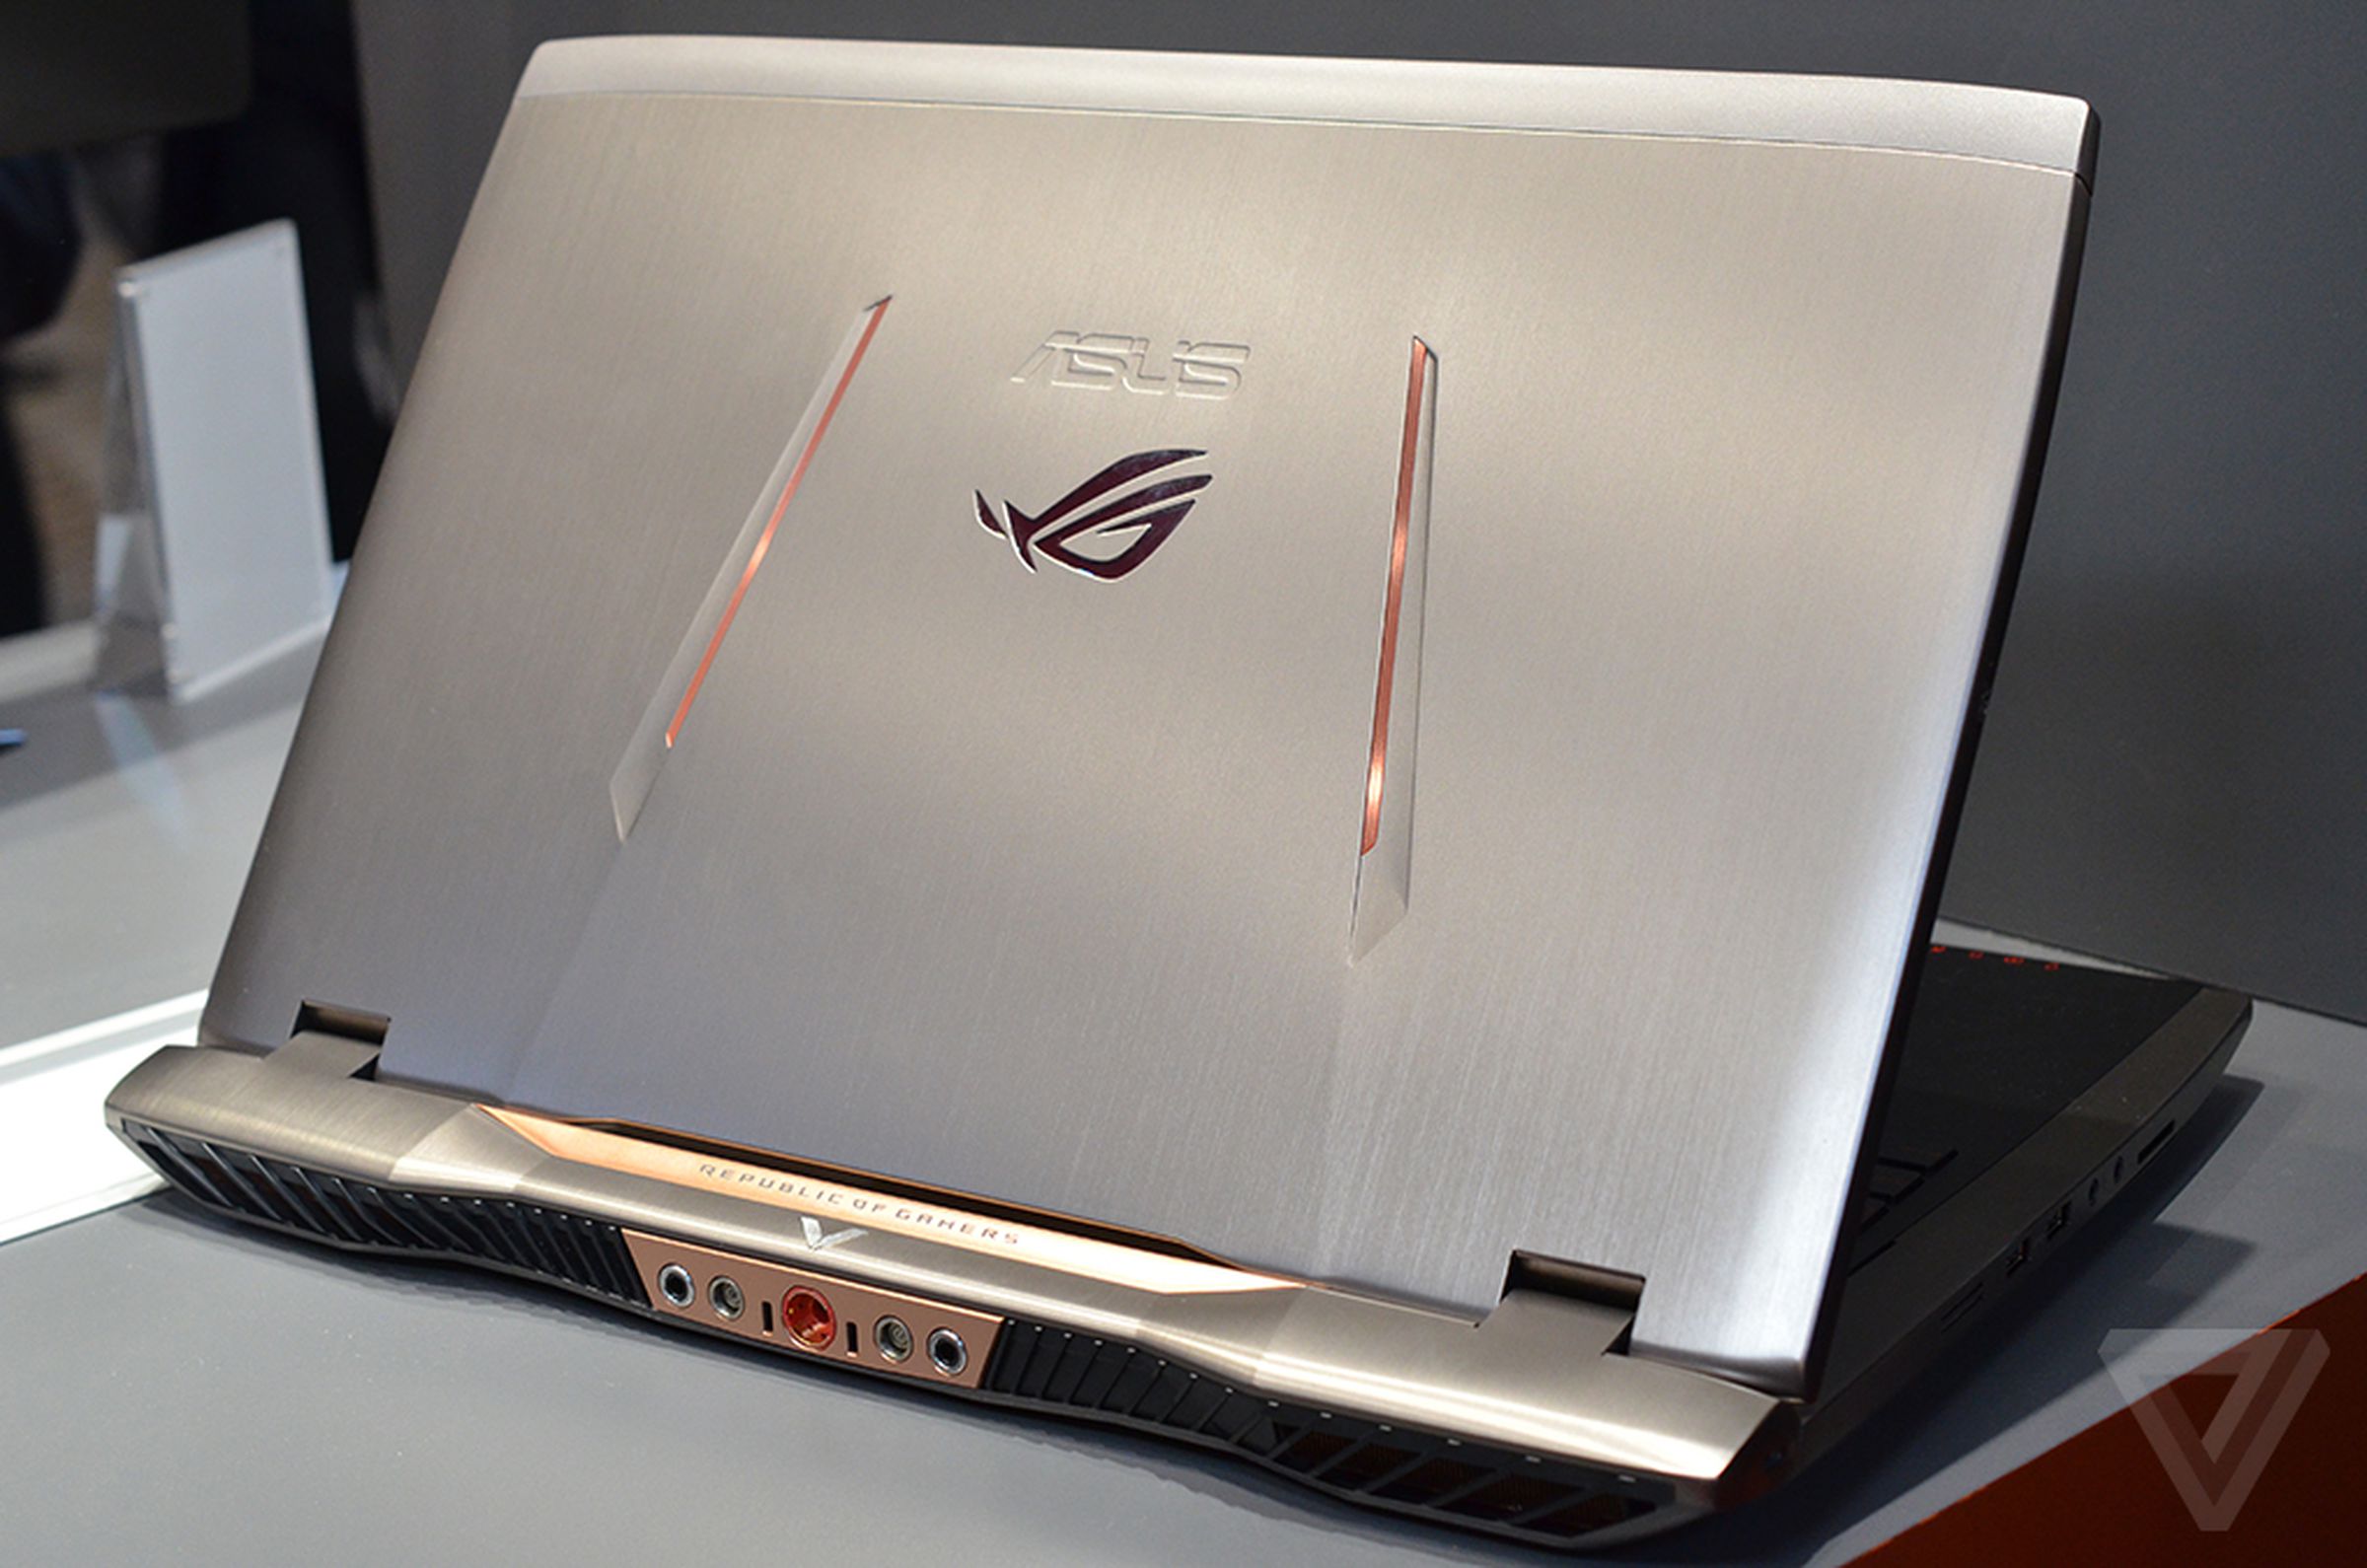 Asus GX700 gaming laptop hands-on photos